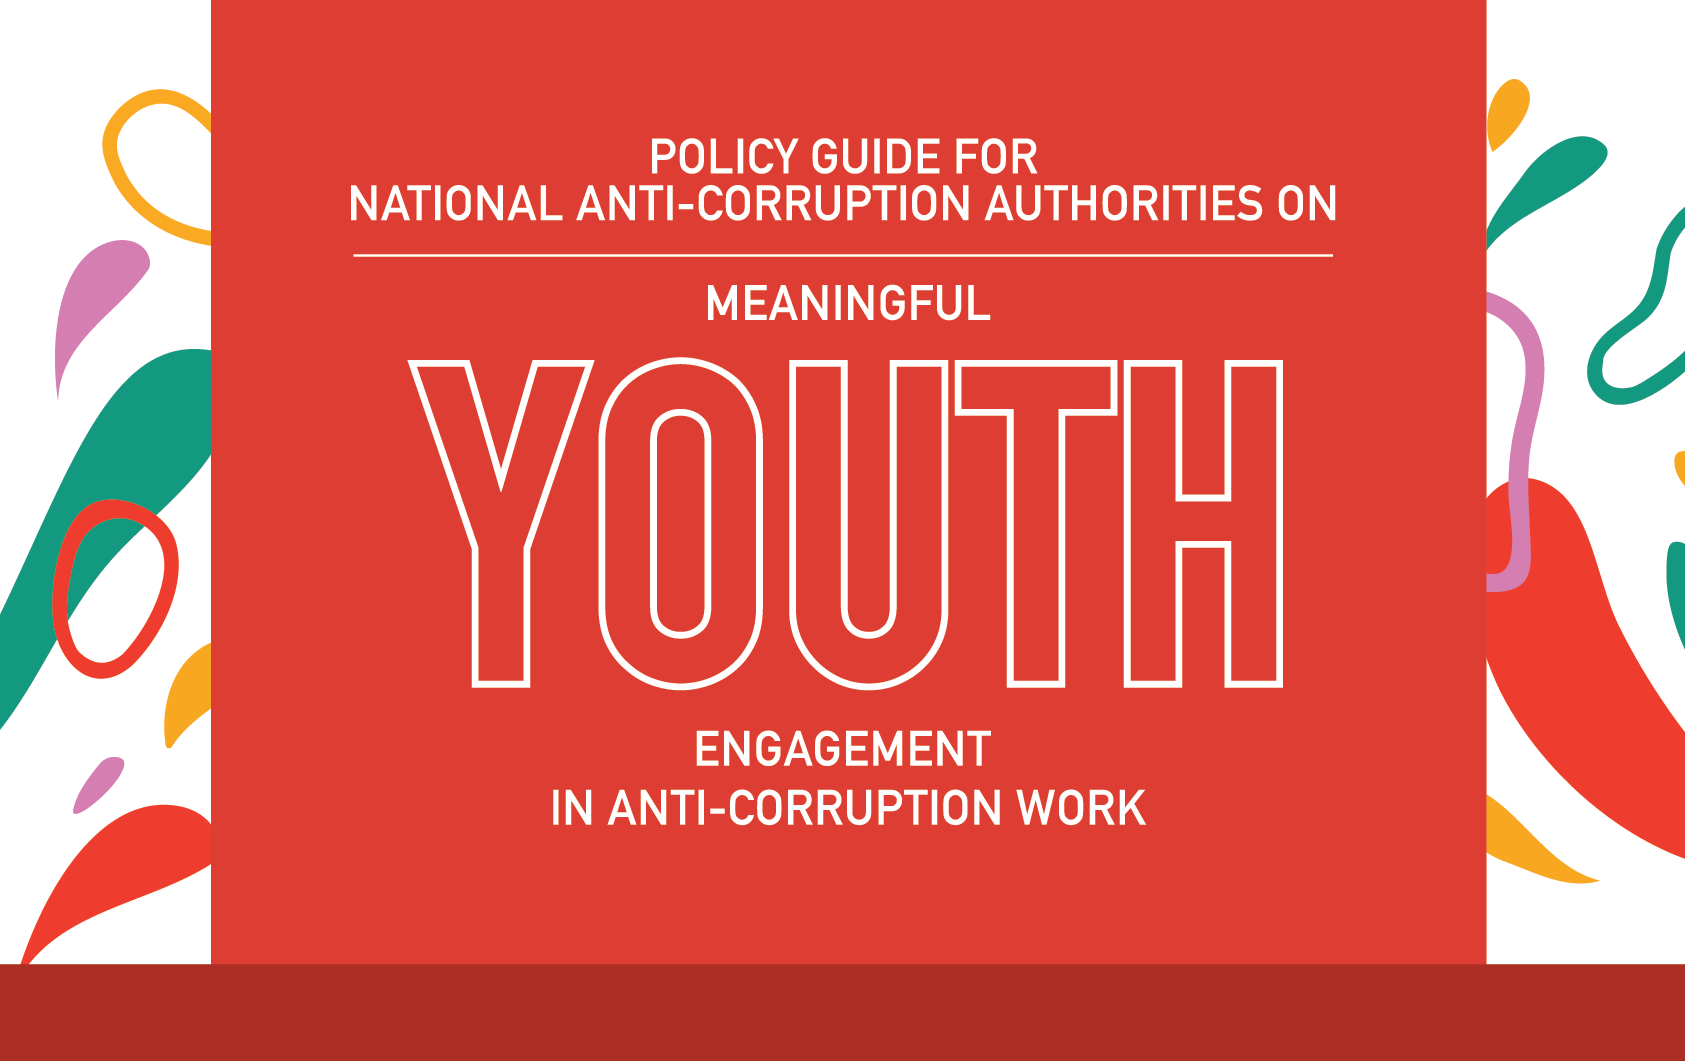 Policy Guide for National Anti-Corruption Authorities on Meaningful Youth Engagement in Anti-Corruption Work